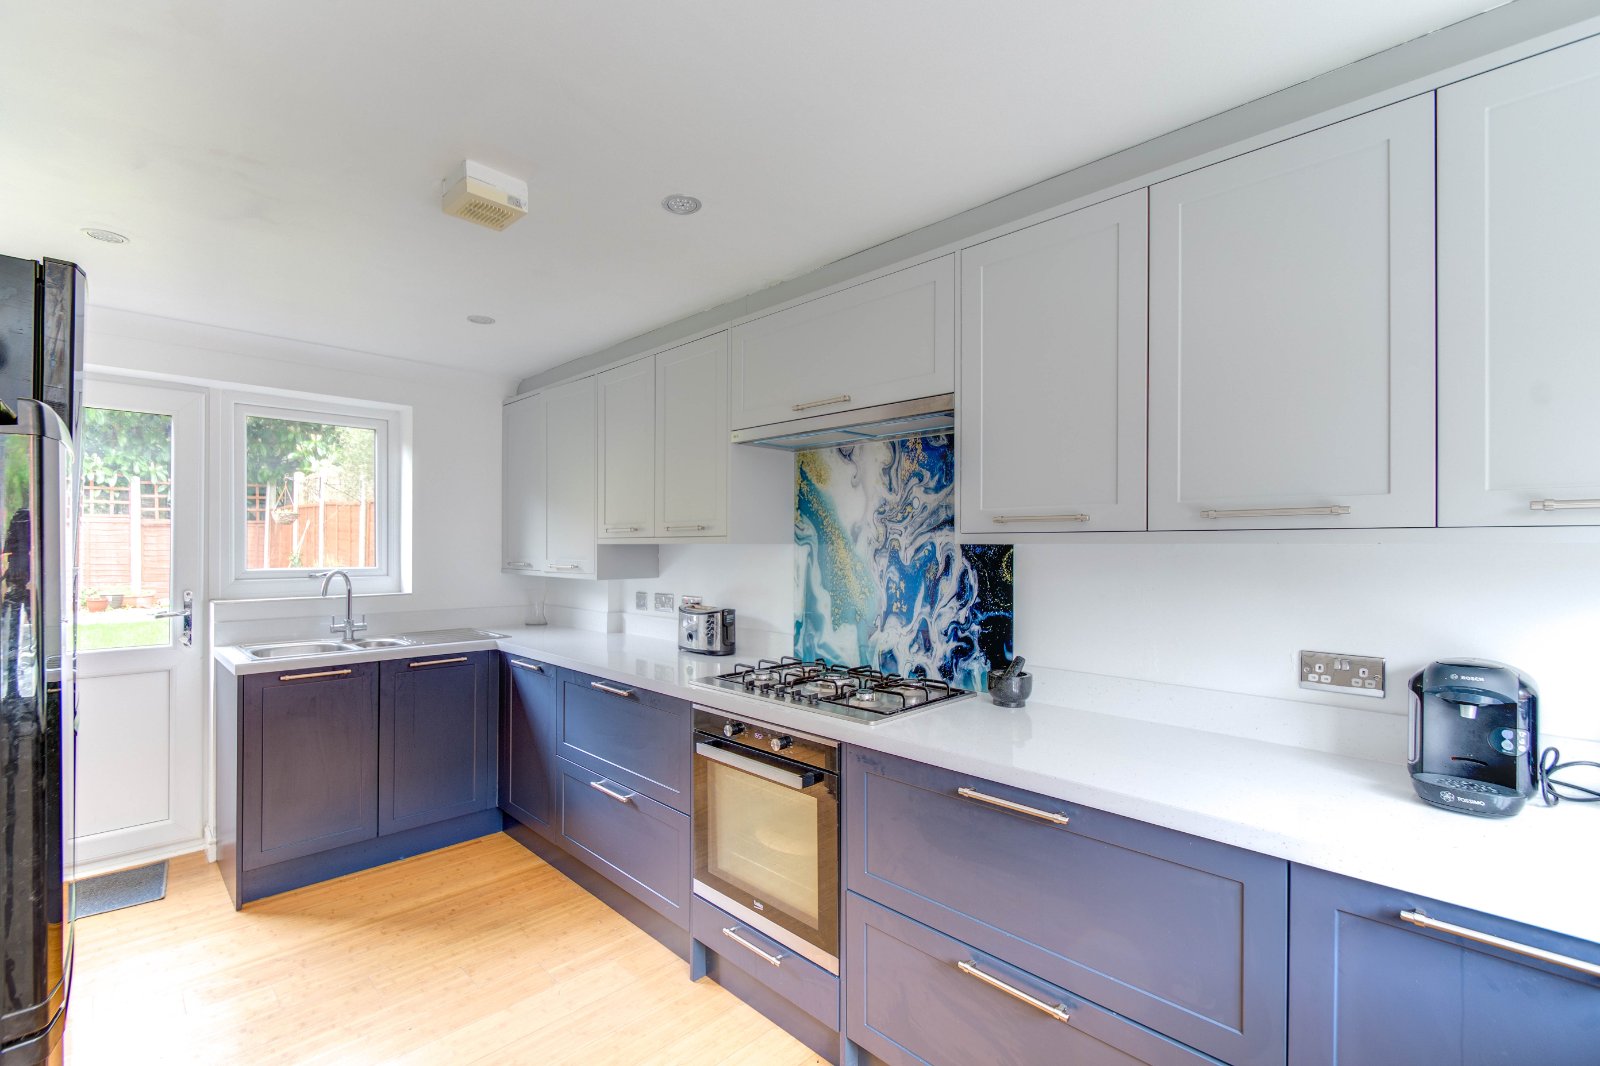 4 bed  for sale in Linthurst Road, Barnt Green  - Property Image 24